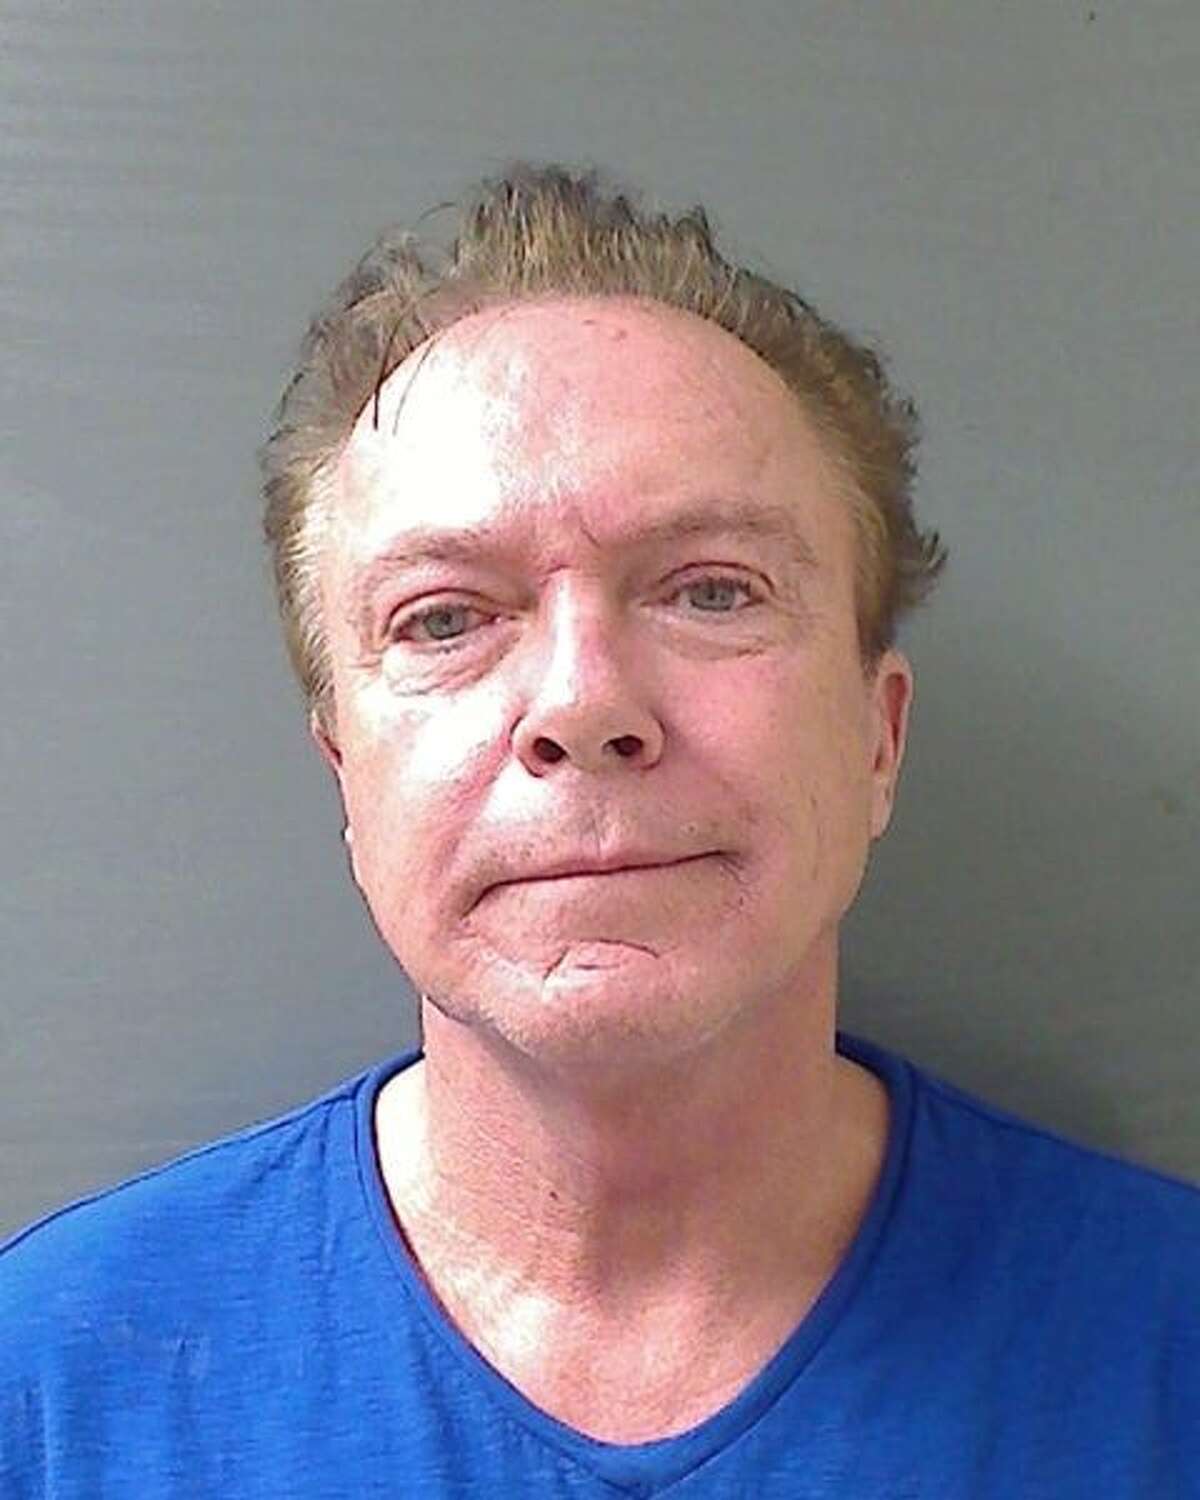 The mugshot from David Cassidy's arrest in Schodack on Tuesday. (Schodack Police Department)